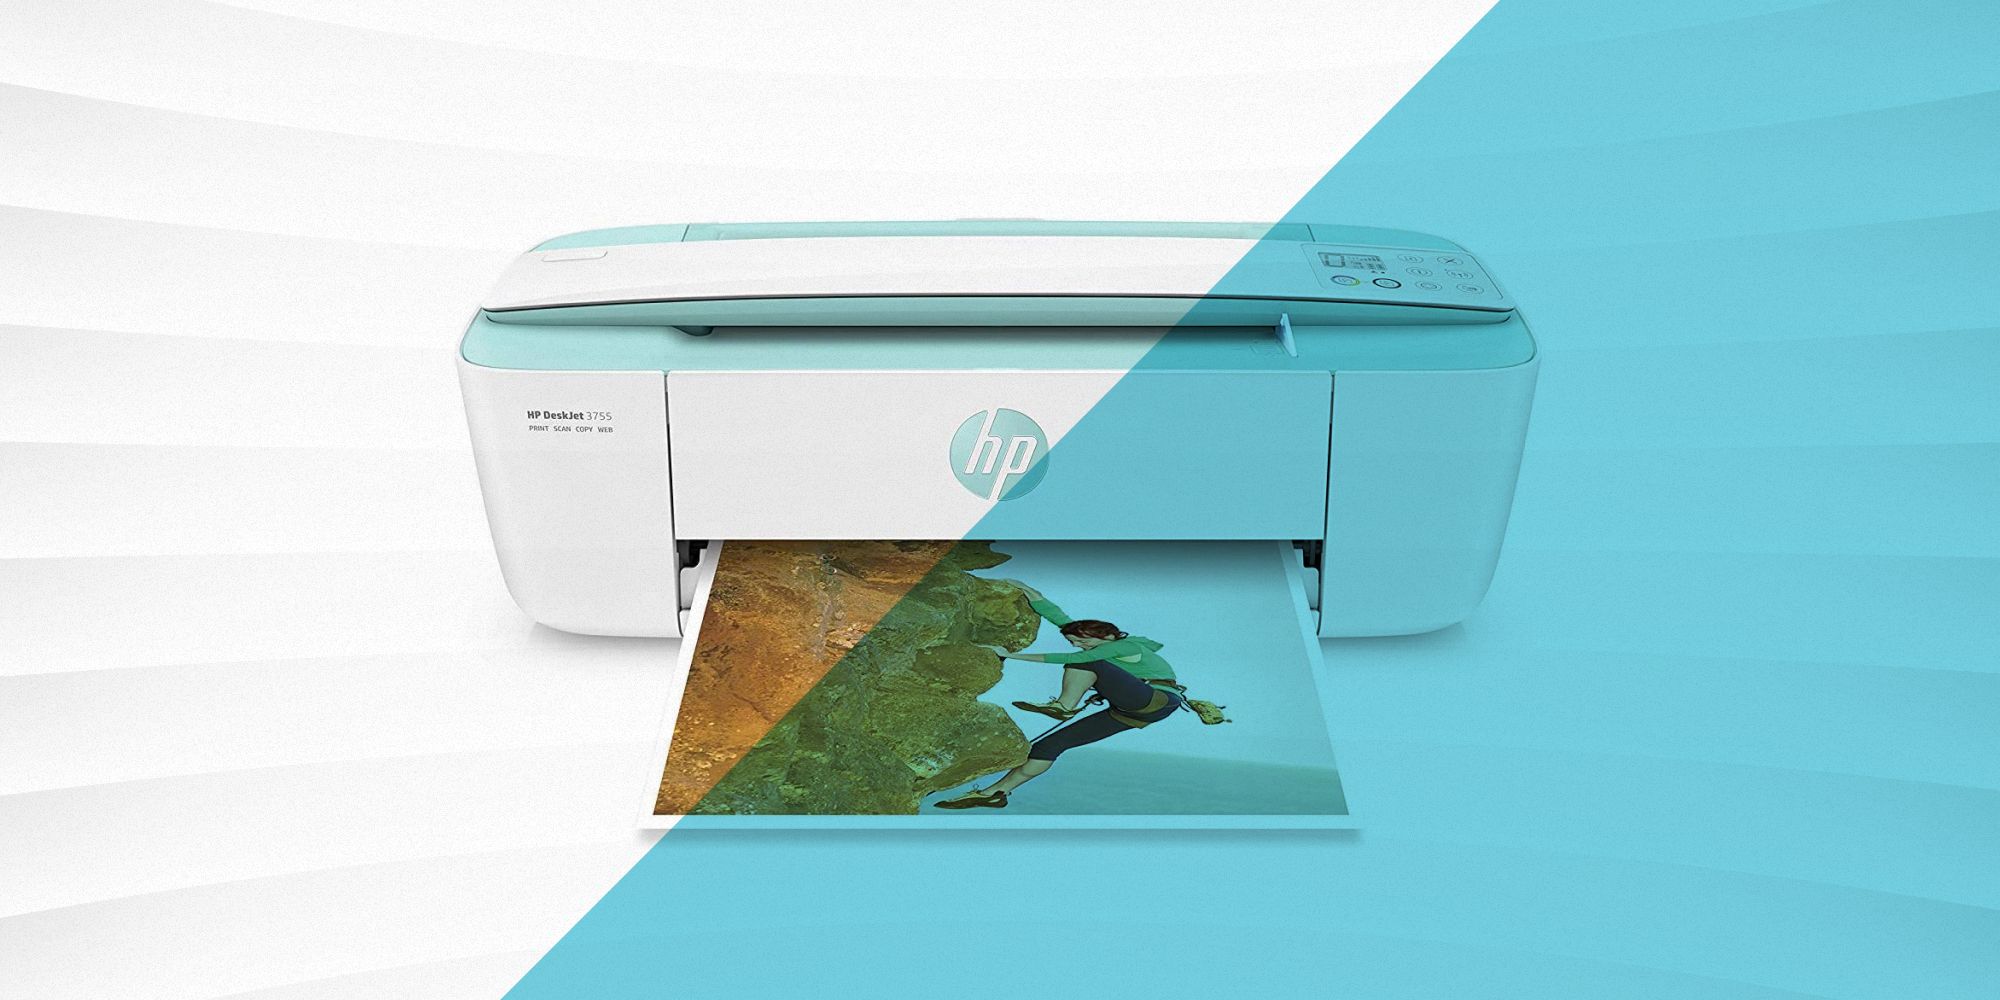 The Best Cheap Printers for - Affordable Printer Recommendations